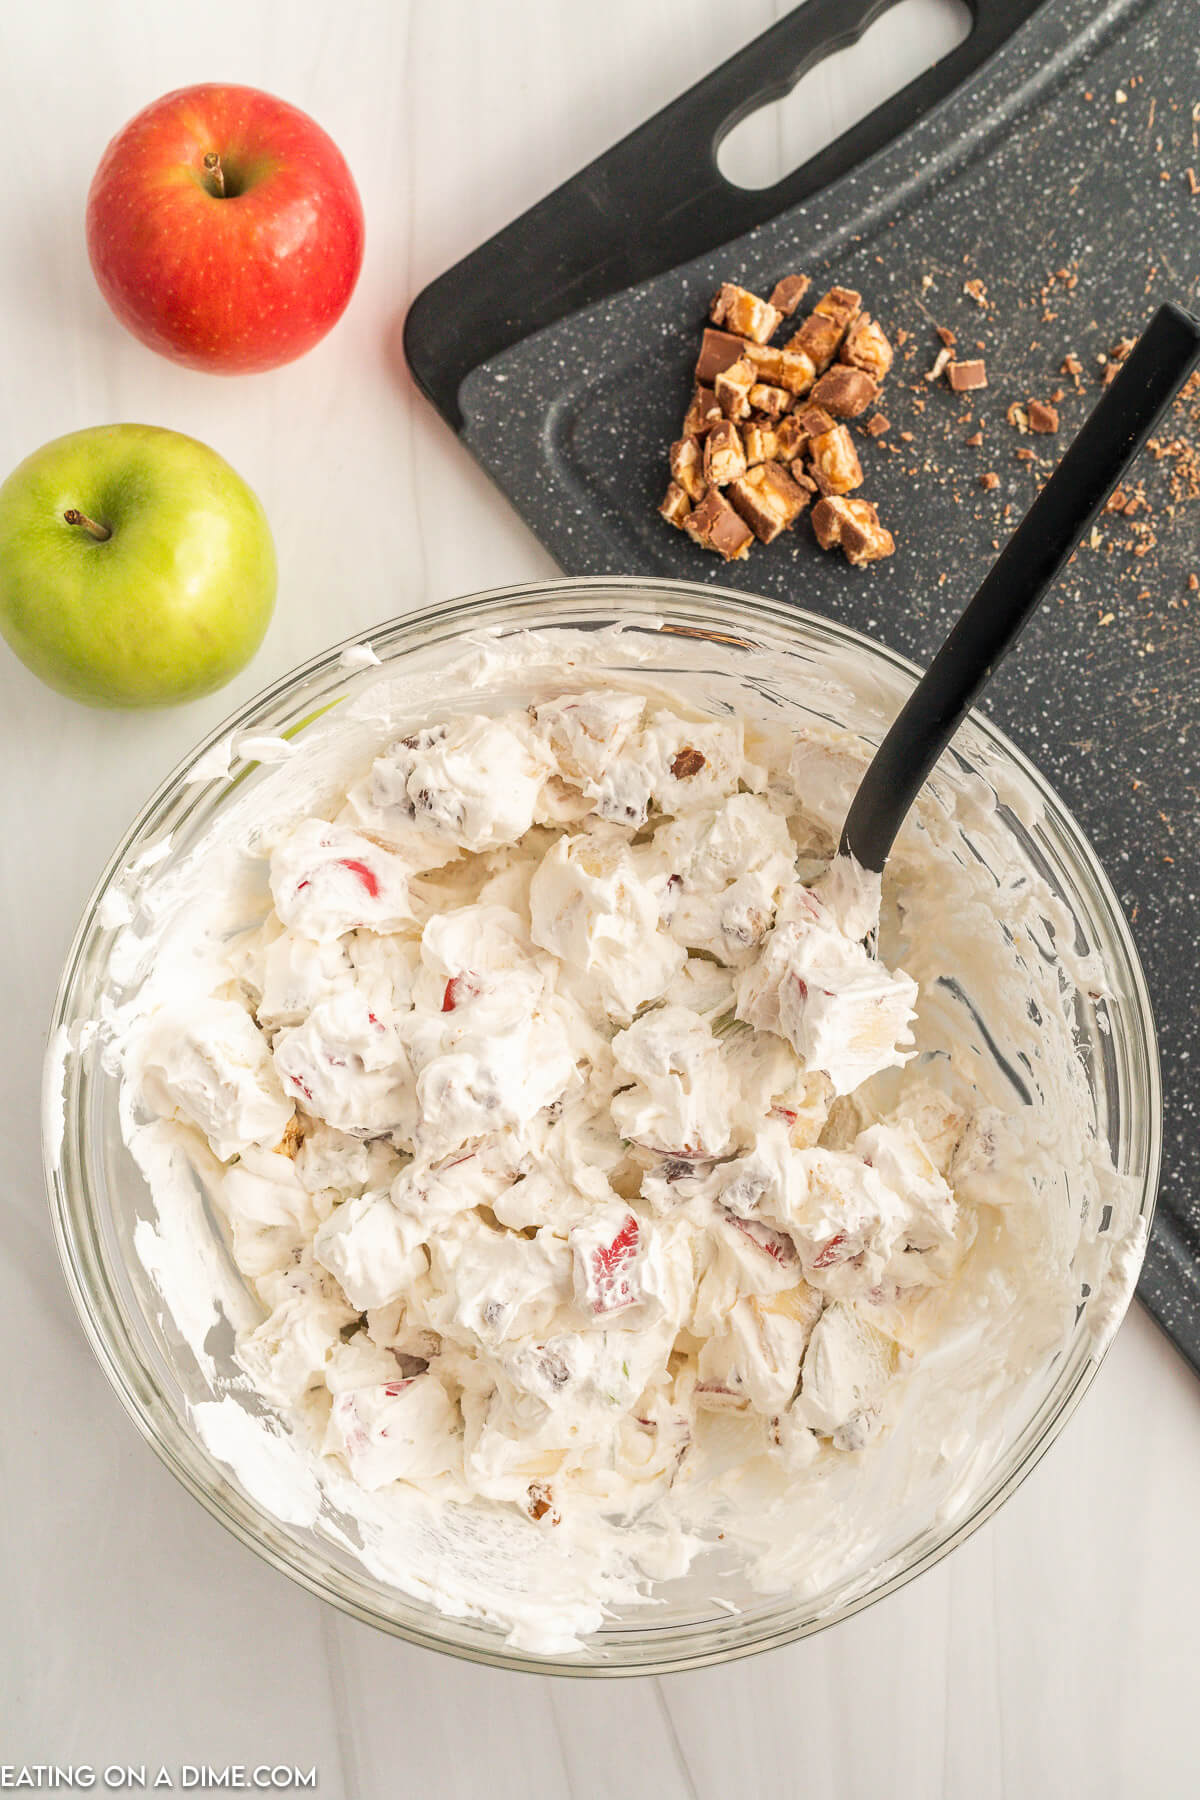 Adding the chopped apples and snickers to the whipped topping in a bowl